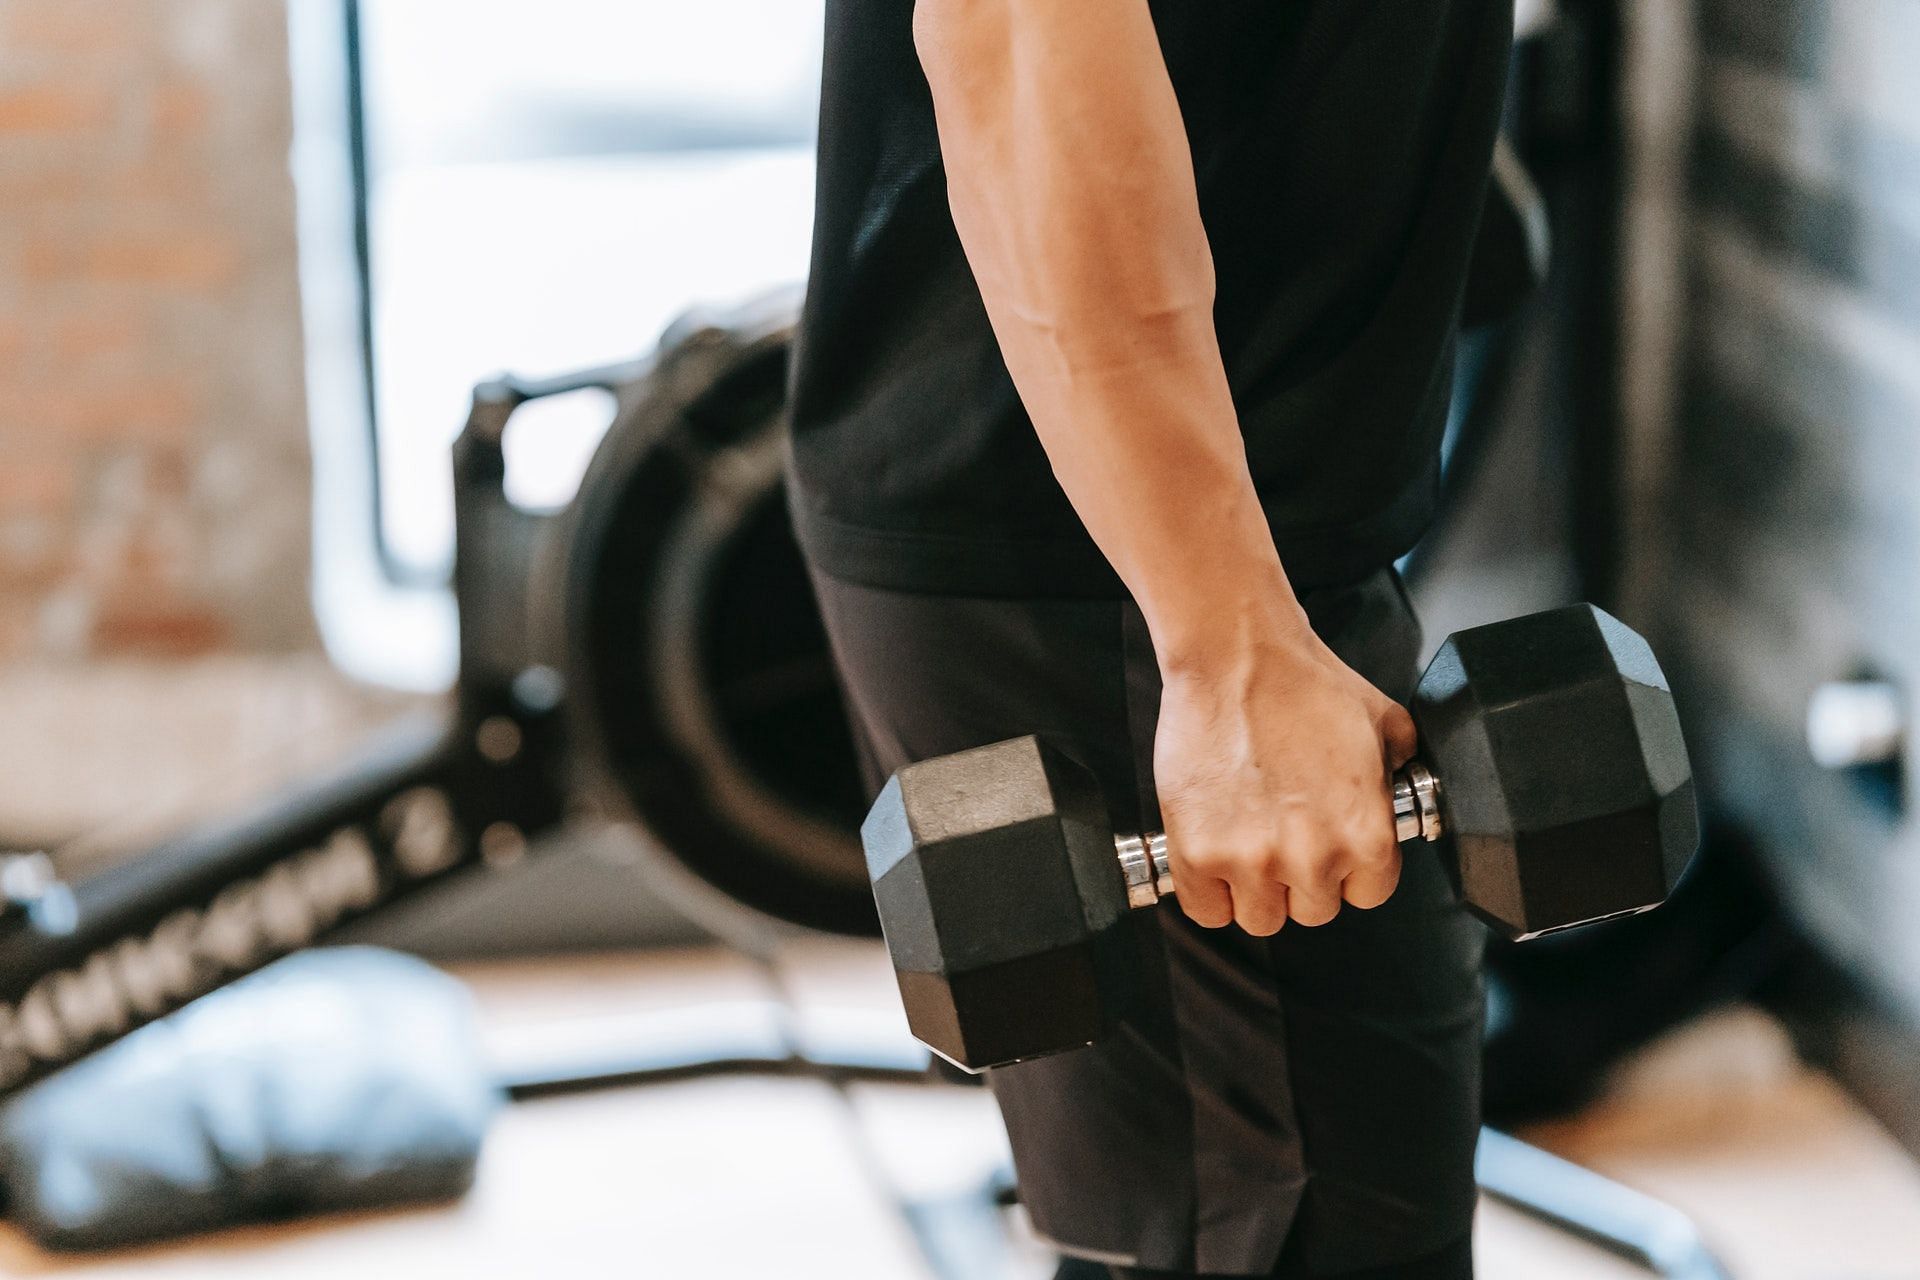 Hip exercises are important to strengthen the hip muscles.(Photo by Andres Ayrton via pexels)